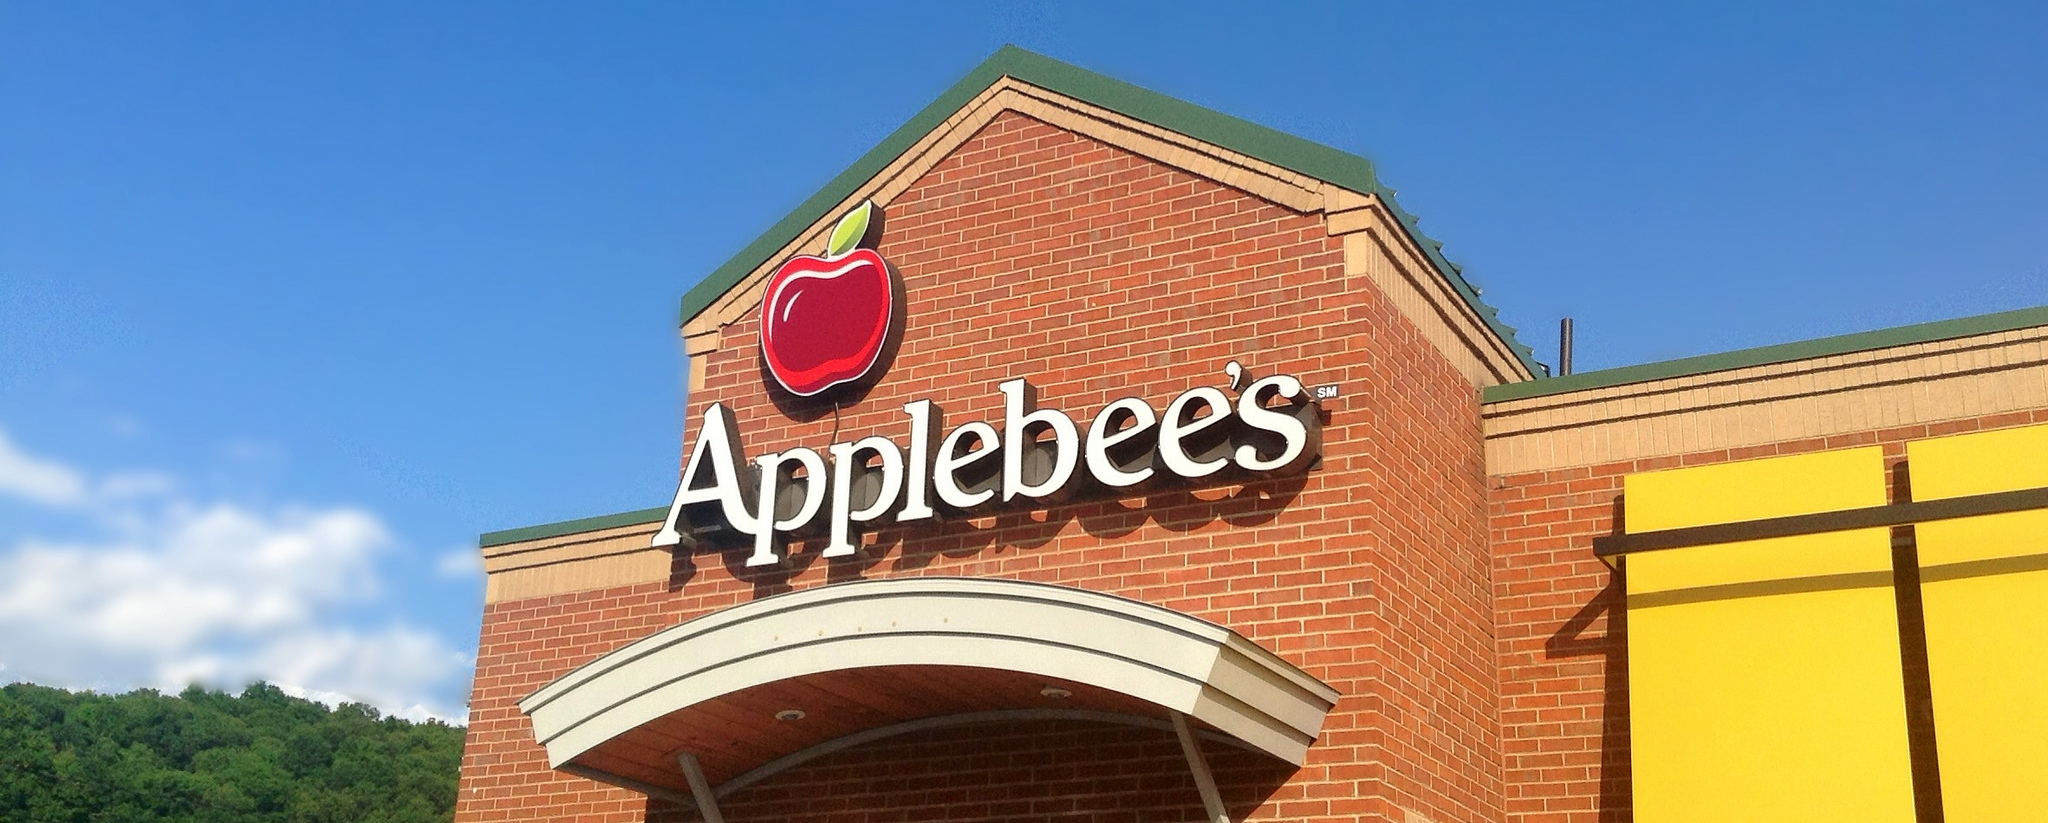 Woman Files Lawsuit Against Applebee’s Claiming She Found Bloody Fingertip In Her Salad